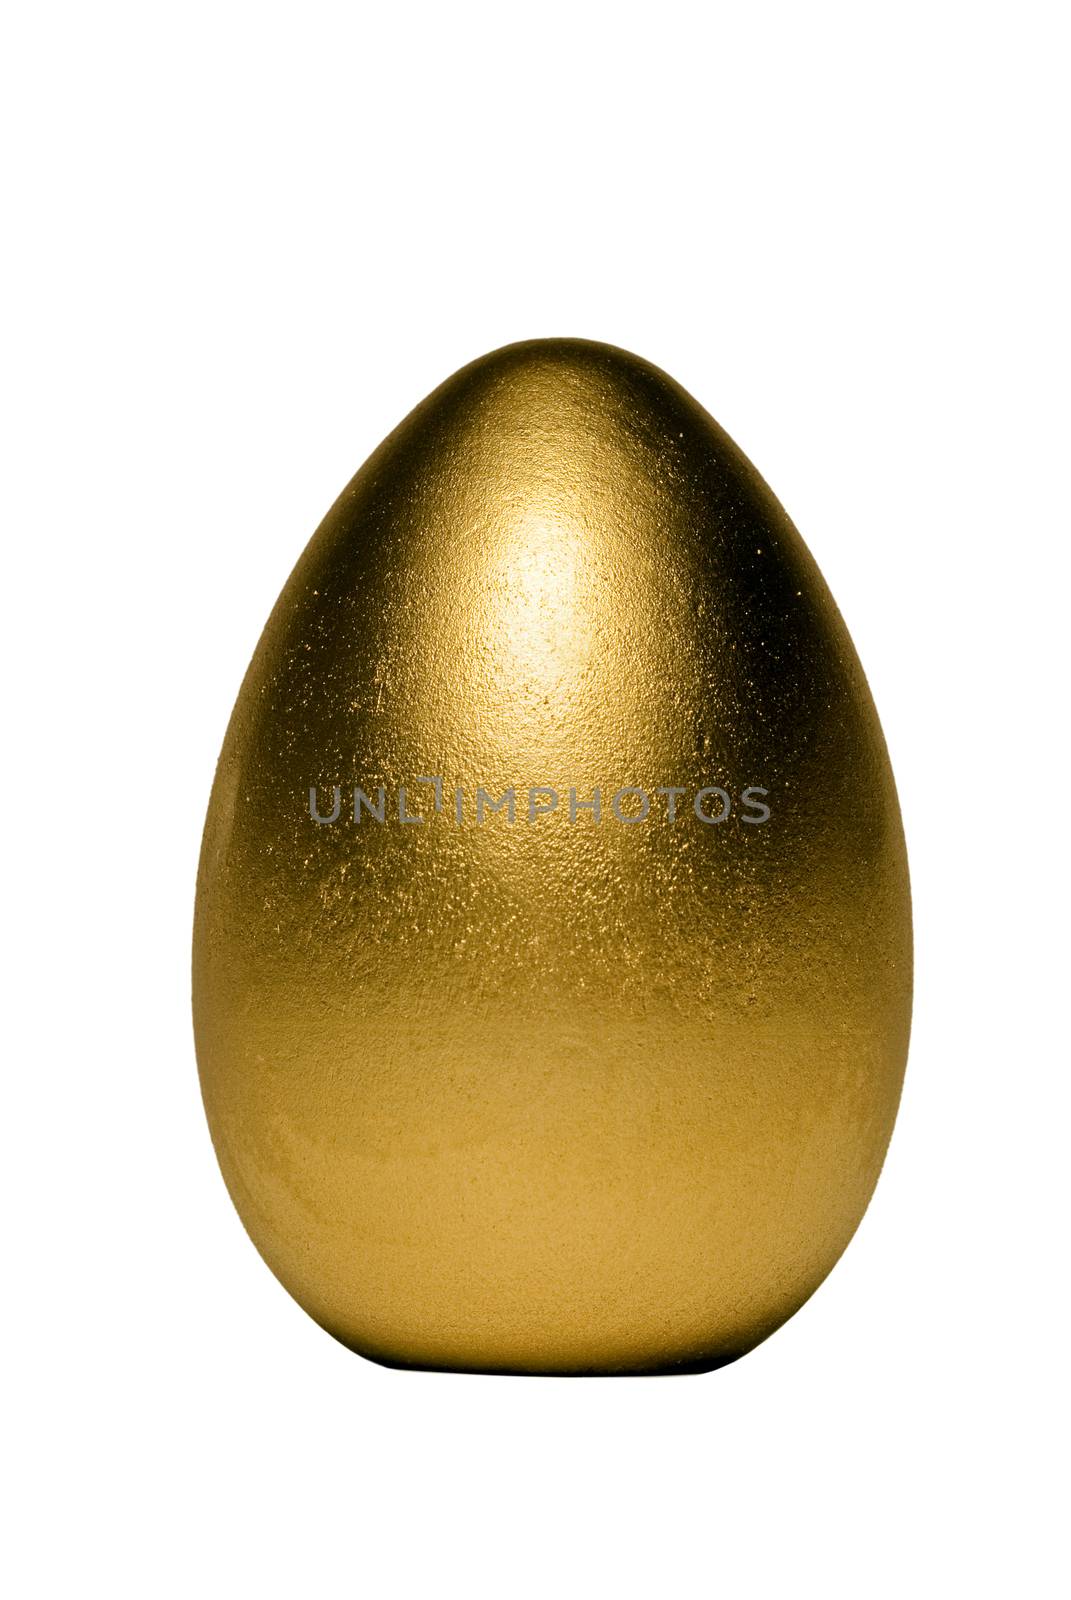 Bright Golden Egg Isolated On White by stockbuster1